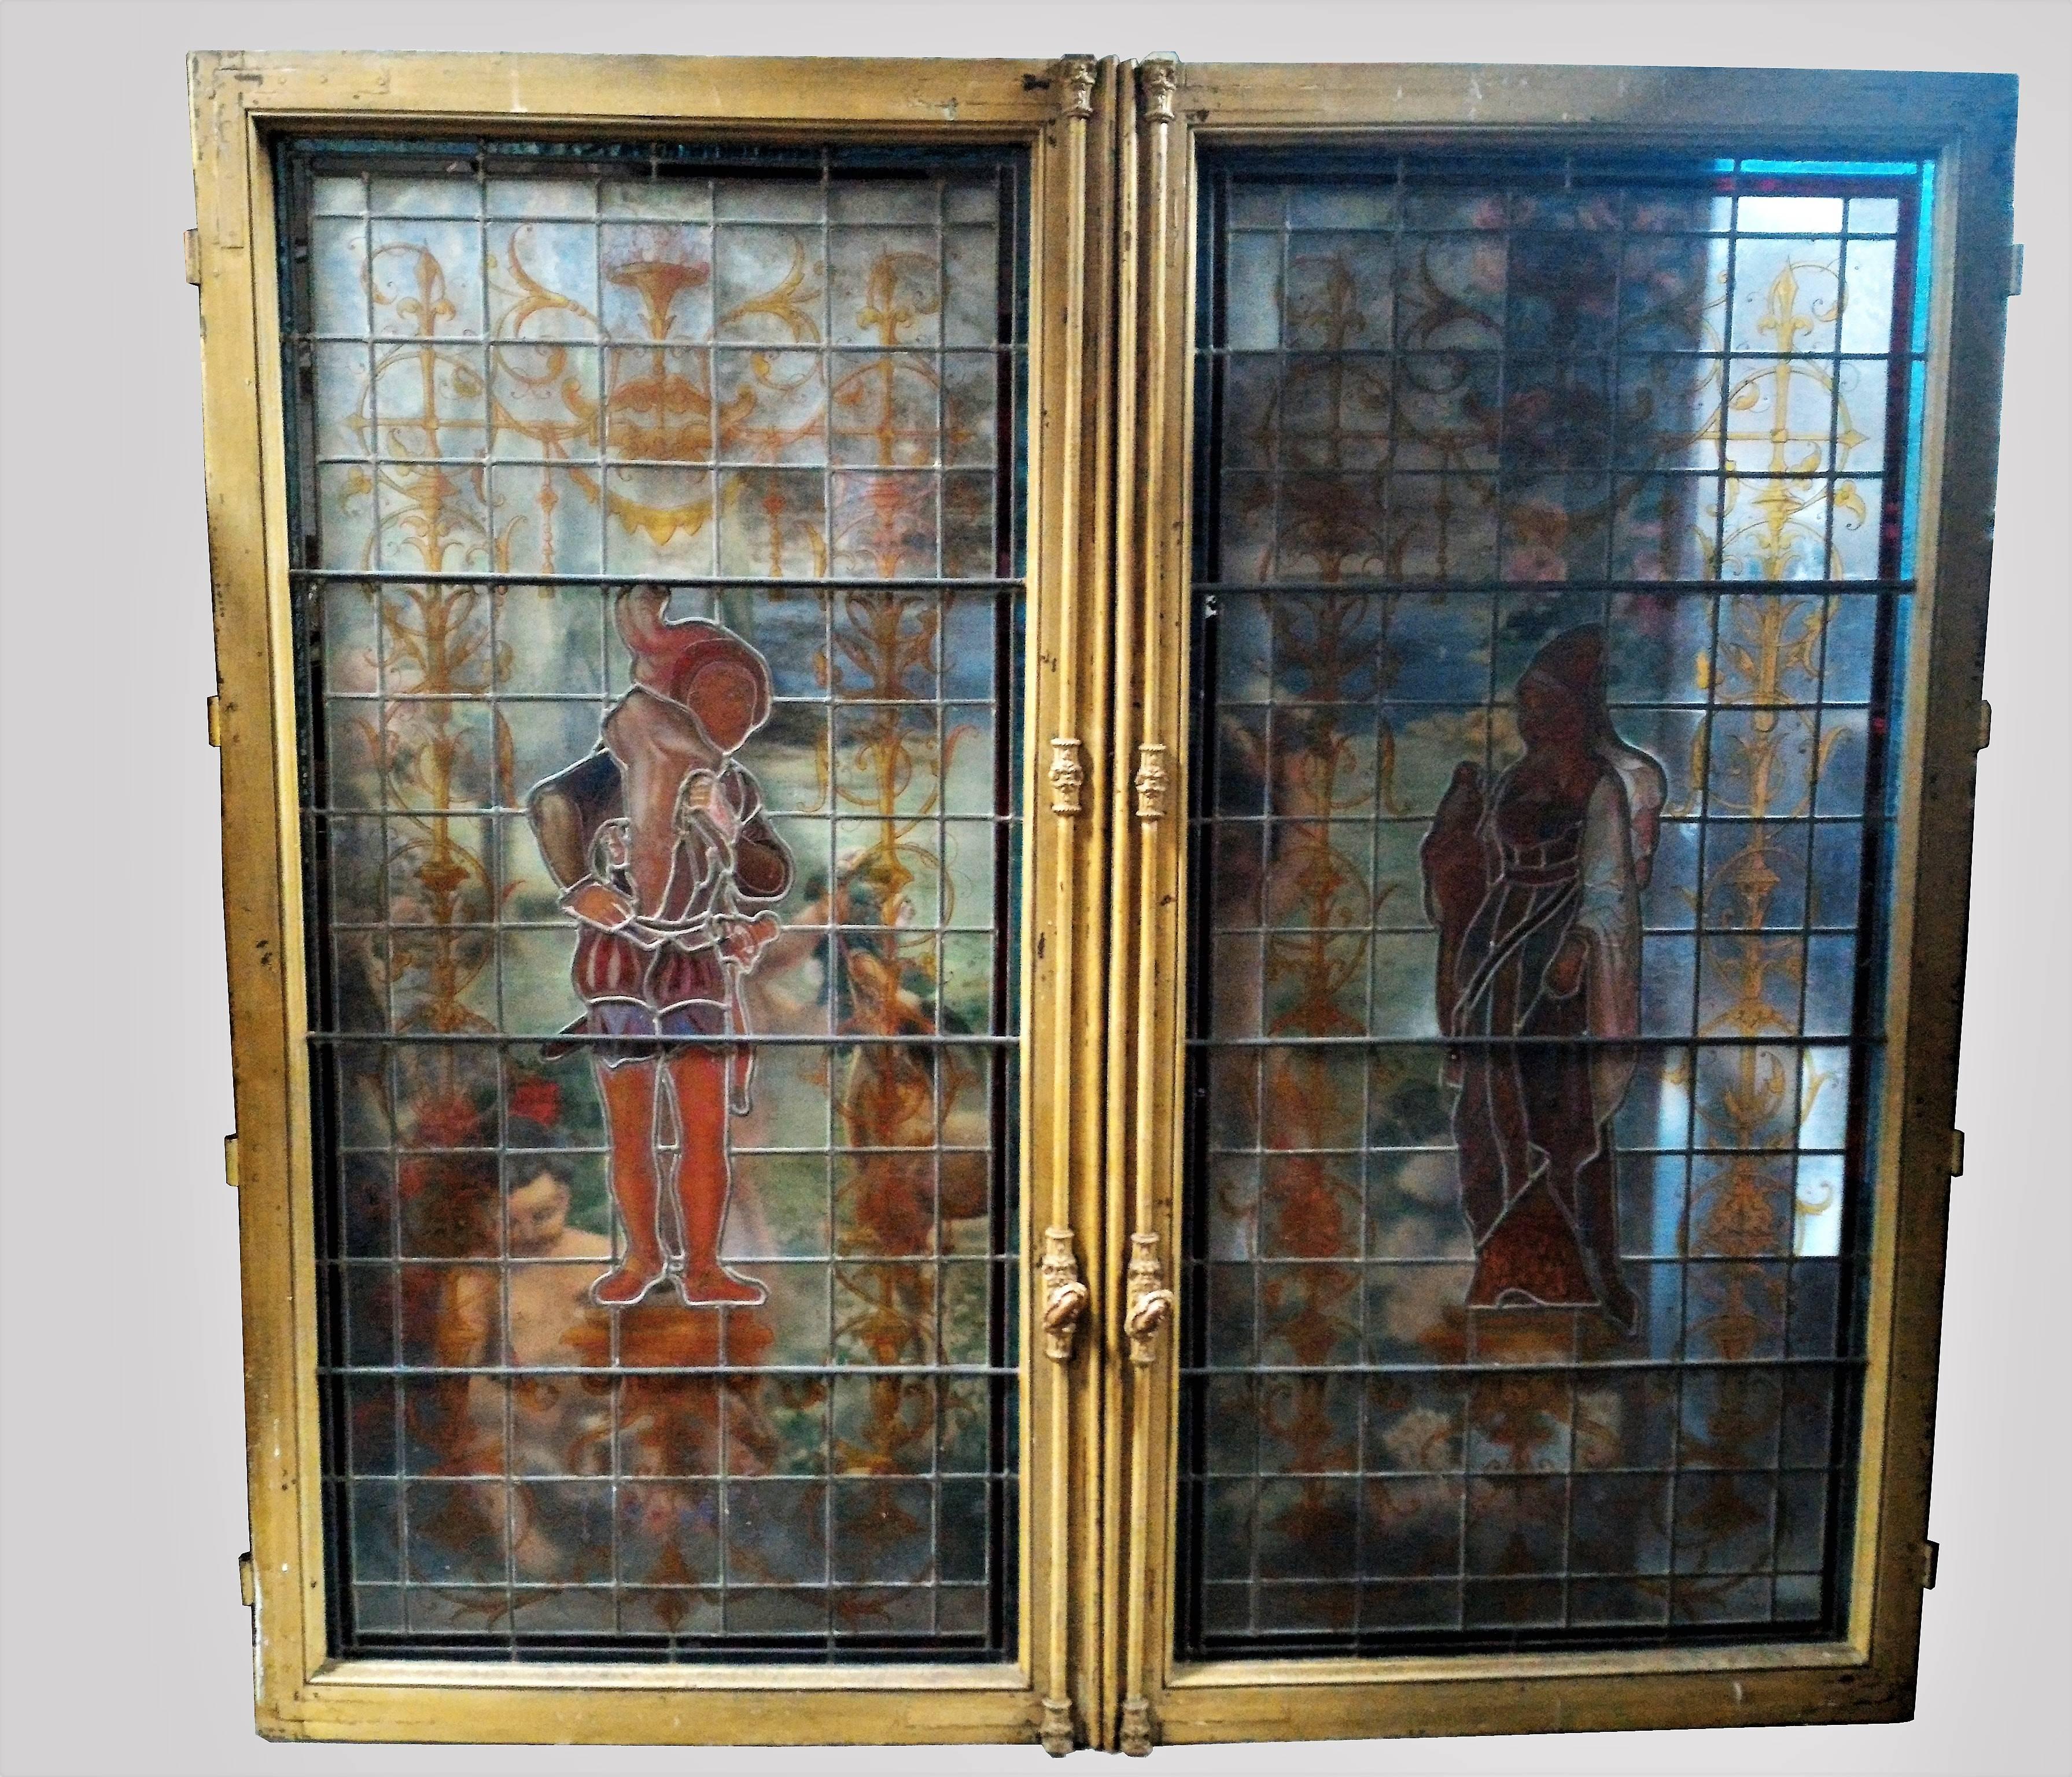 Gorgeous Parisian Renaissance Revival stained glass double window with fantastic colors, ornements and Renaissance characters.
Paris, 19th century, circa 1880.

Original window Framed in their elegant Parisian style handles. In a very good